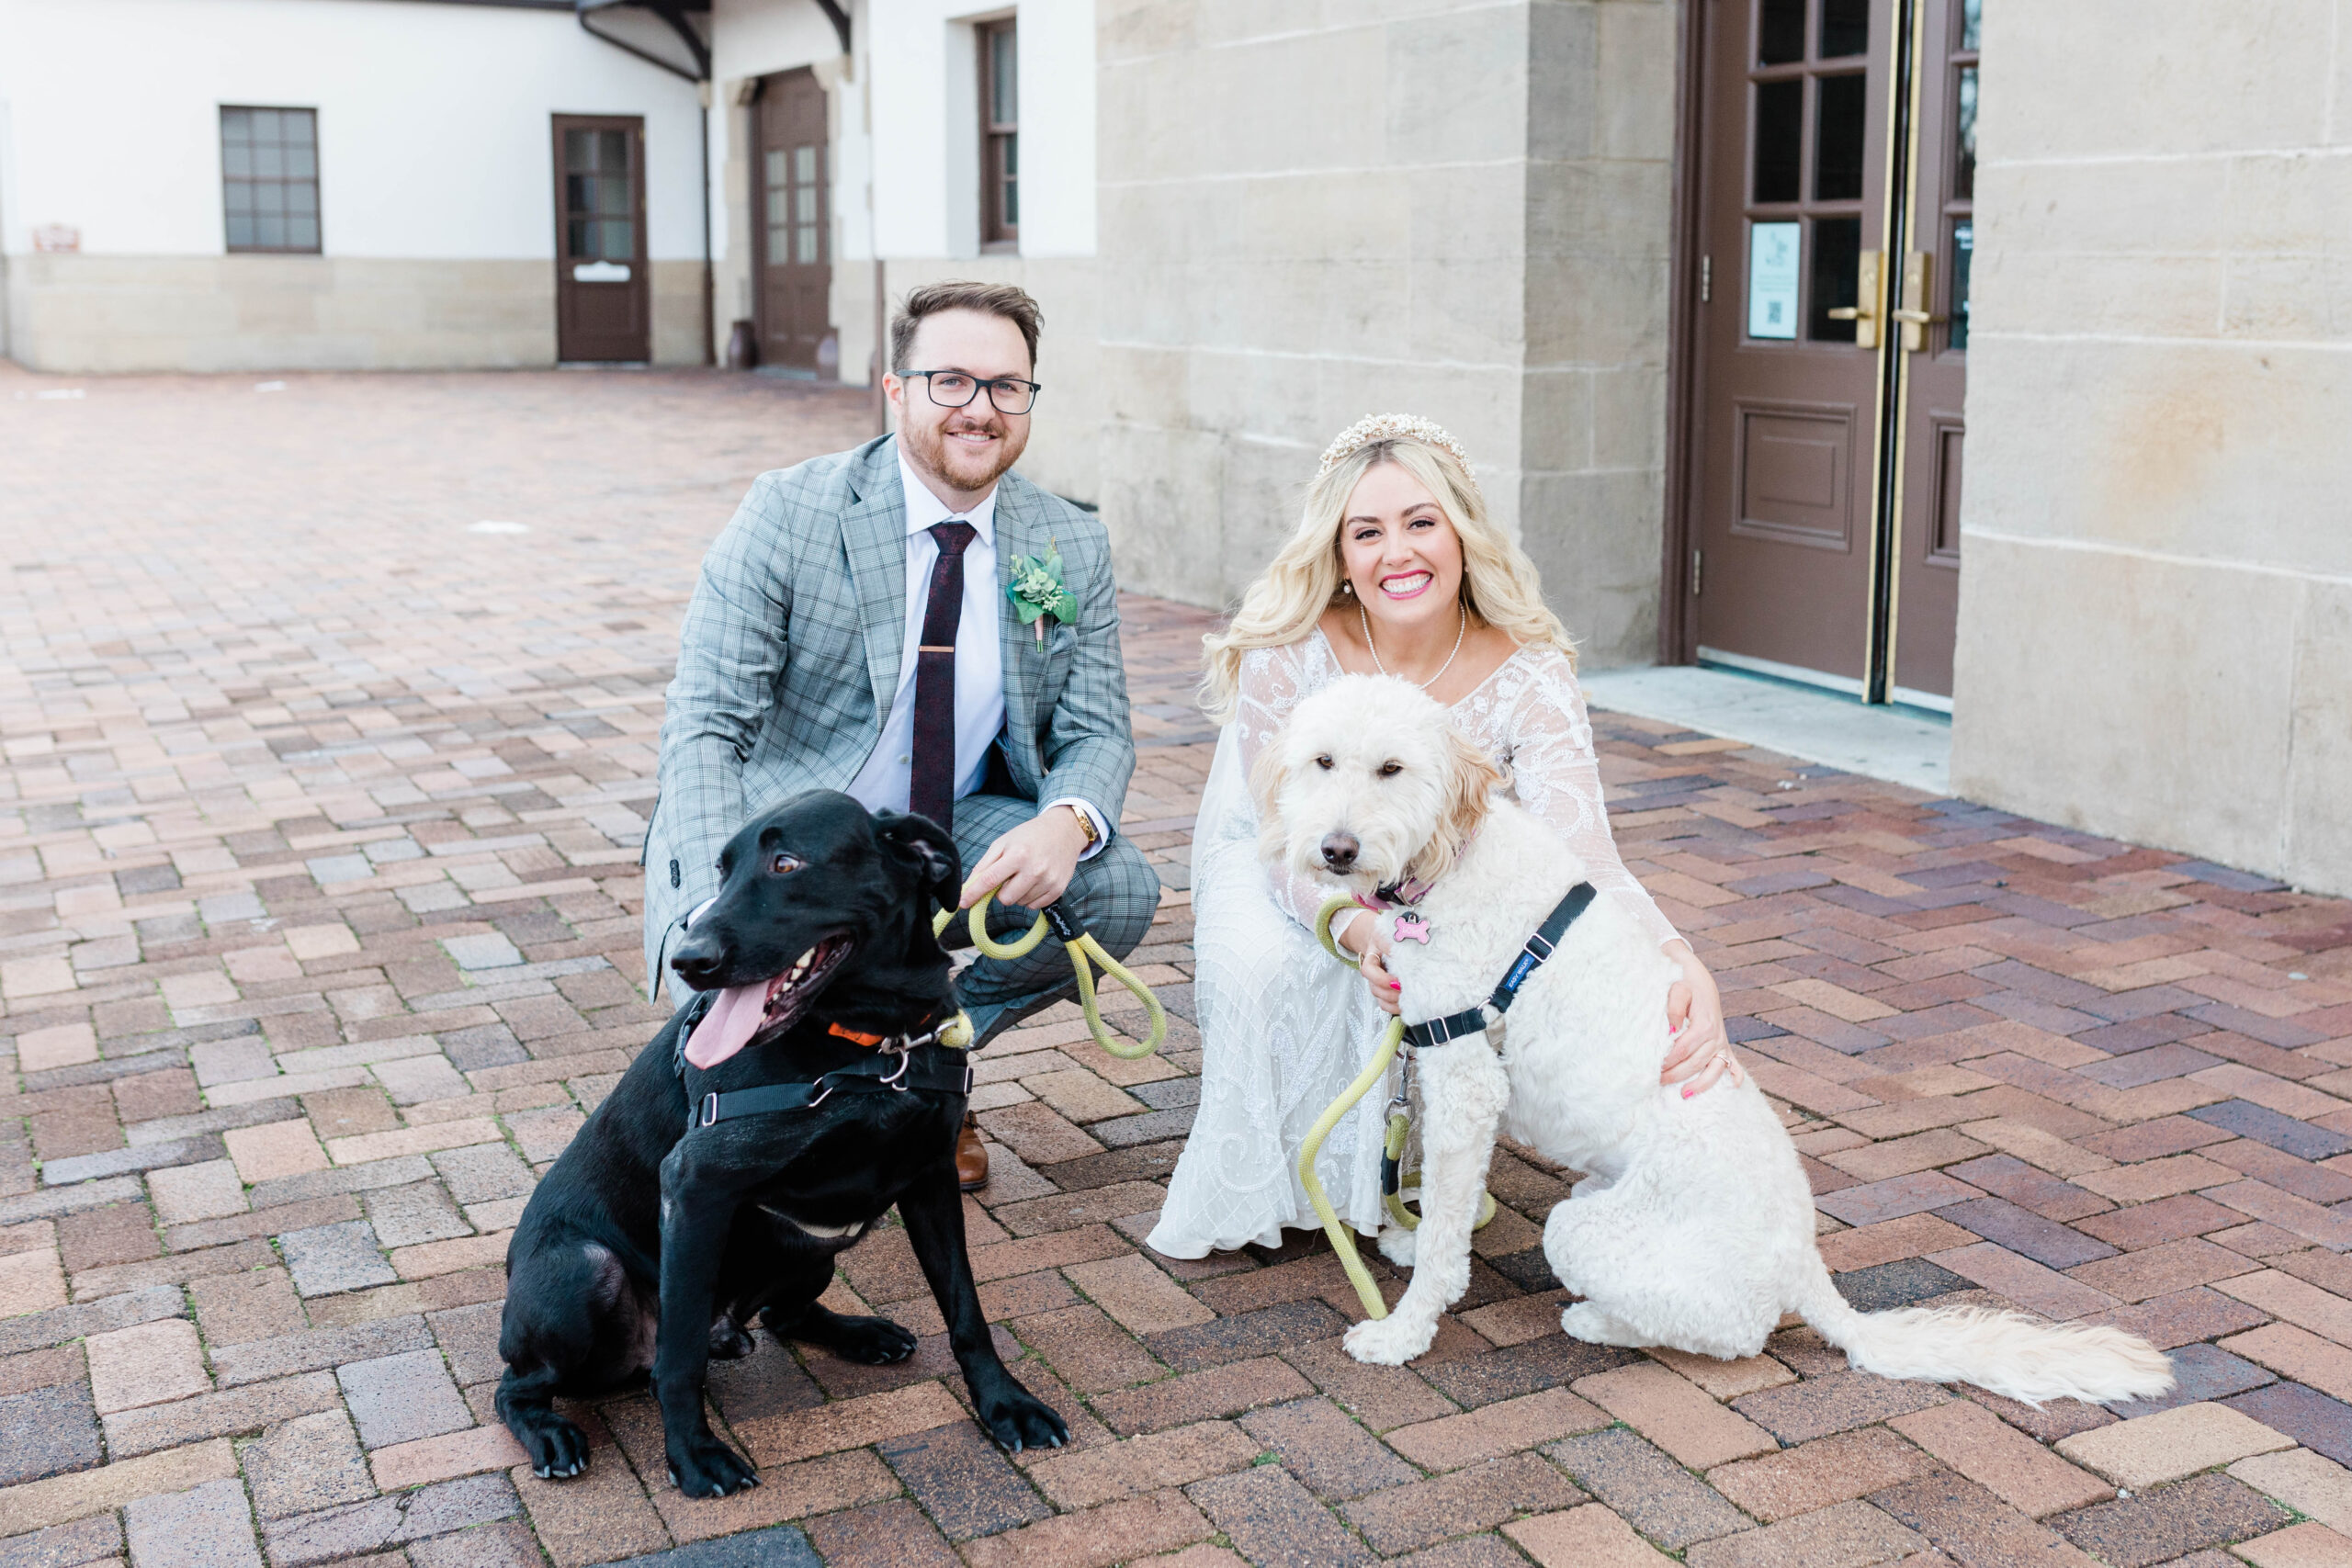 Boise wedding photographer captures bride and groom standing with pets after including them in Boise wedding